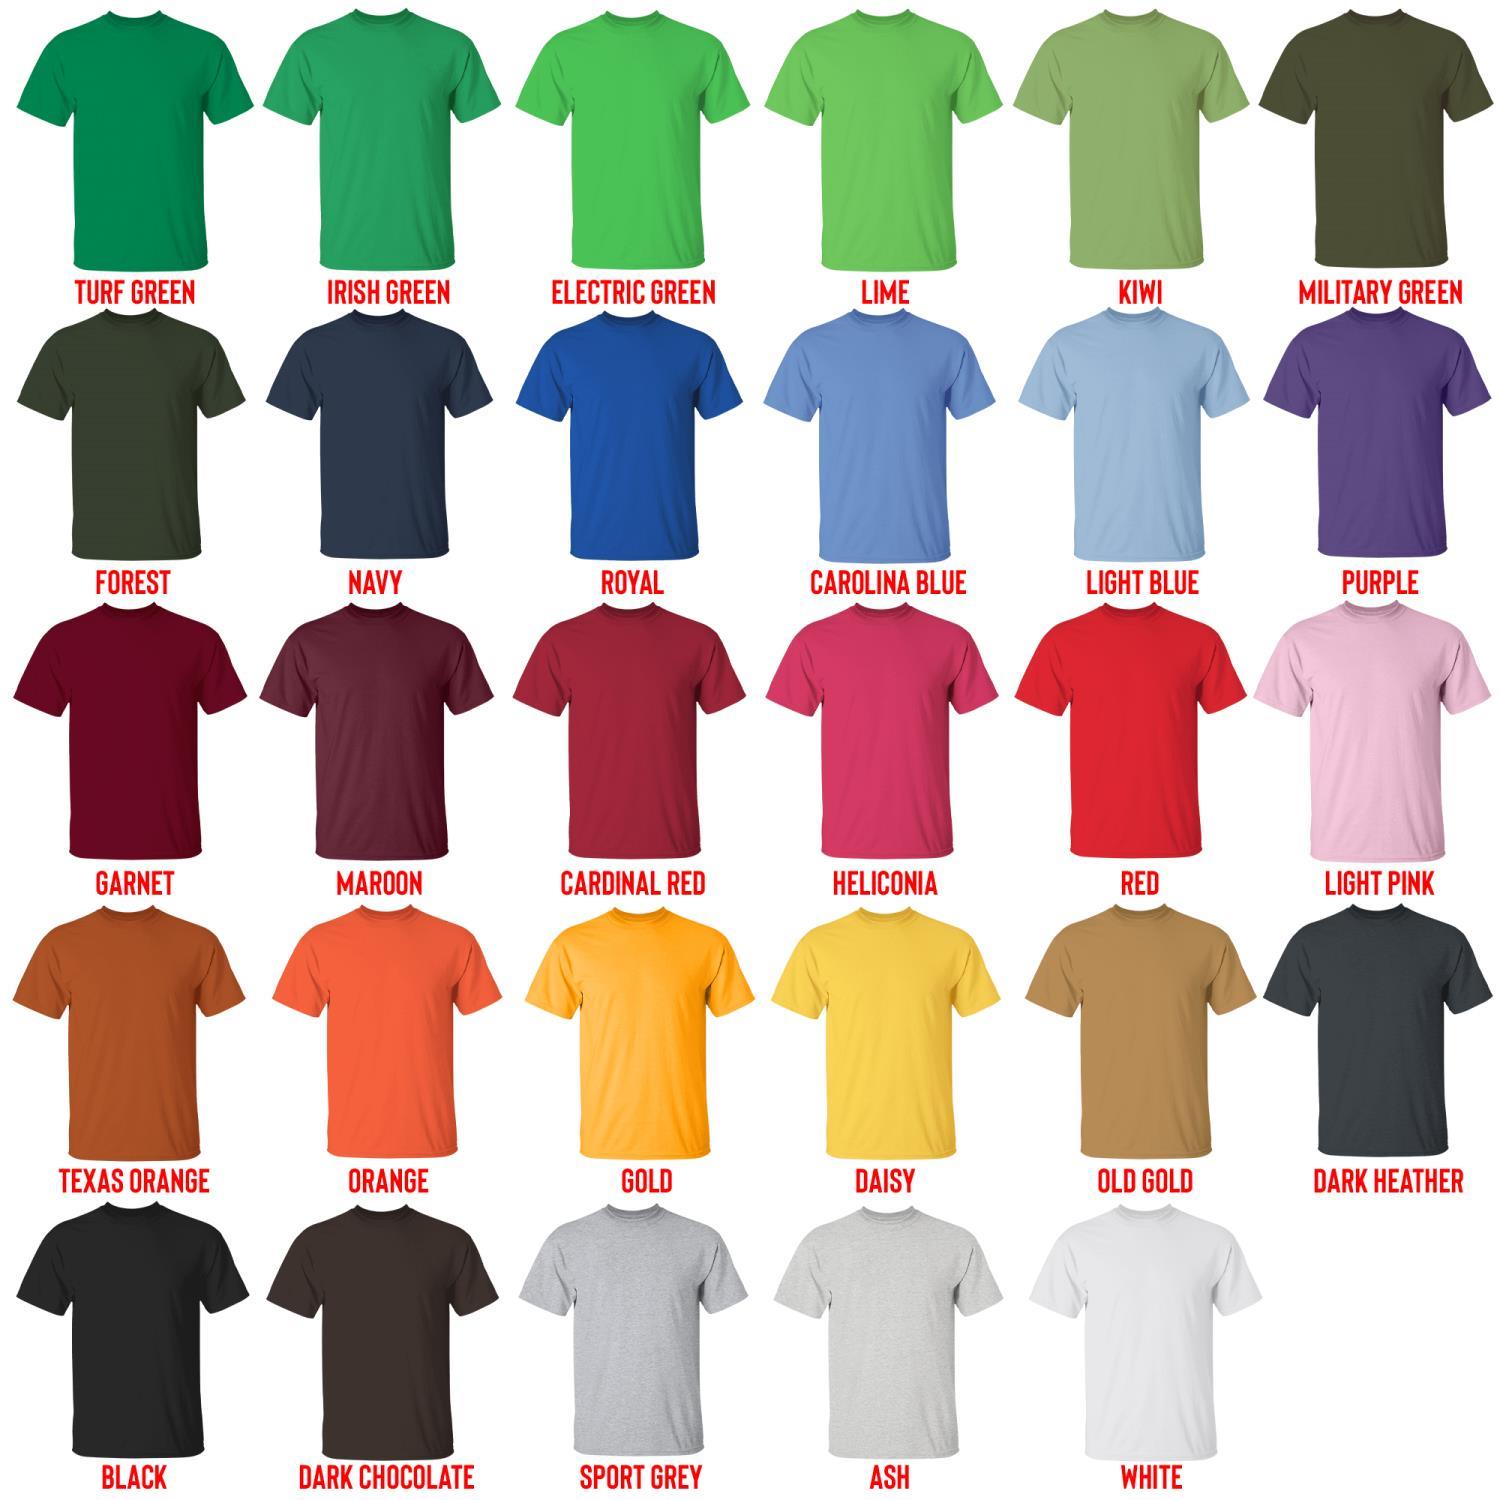 t shirt color chart - Blink 182 Band Store